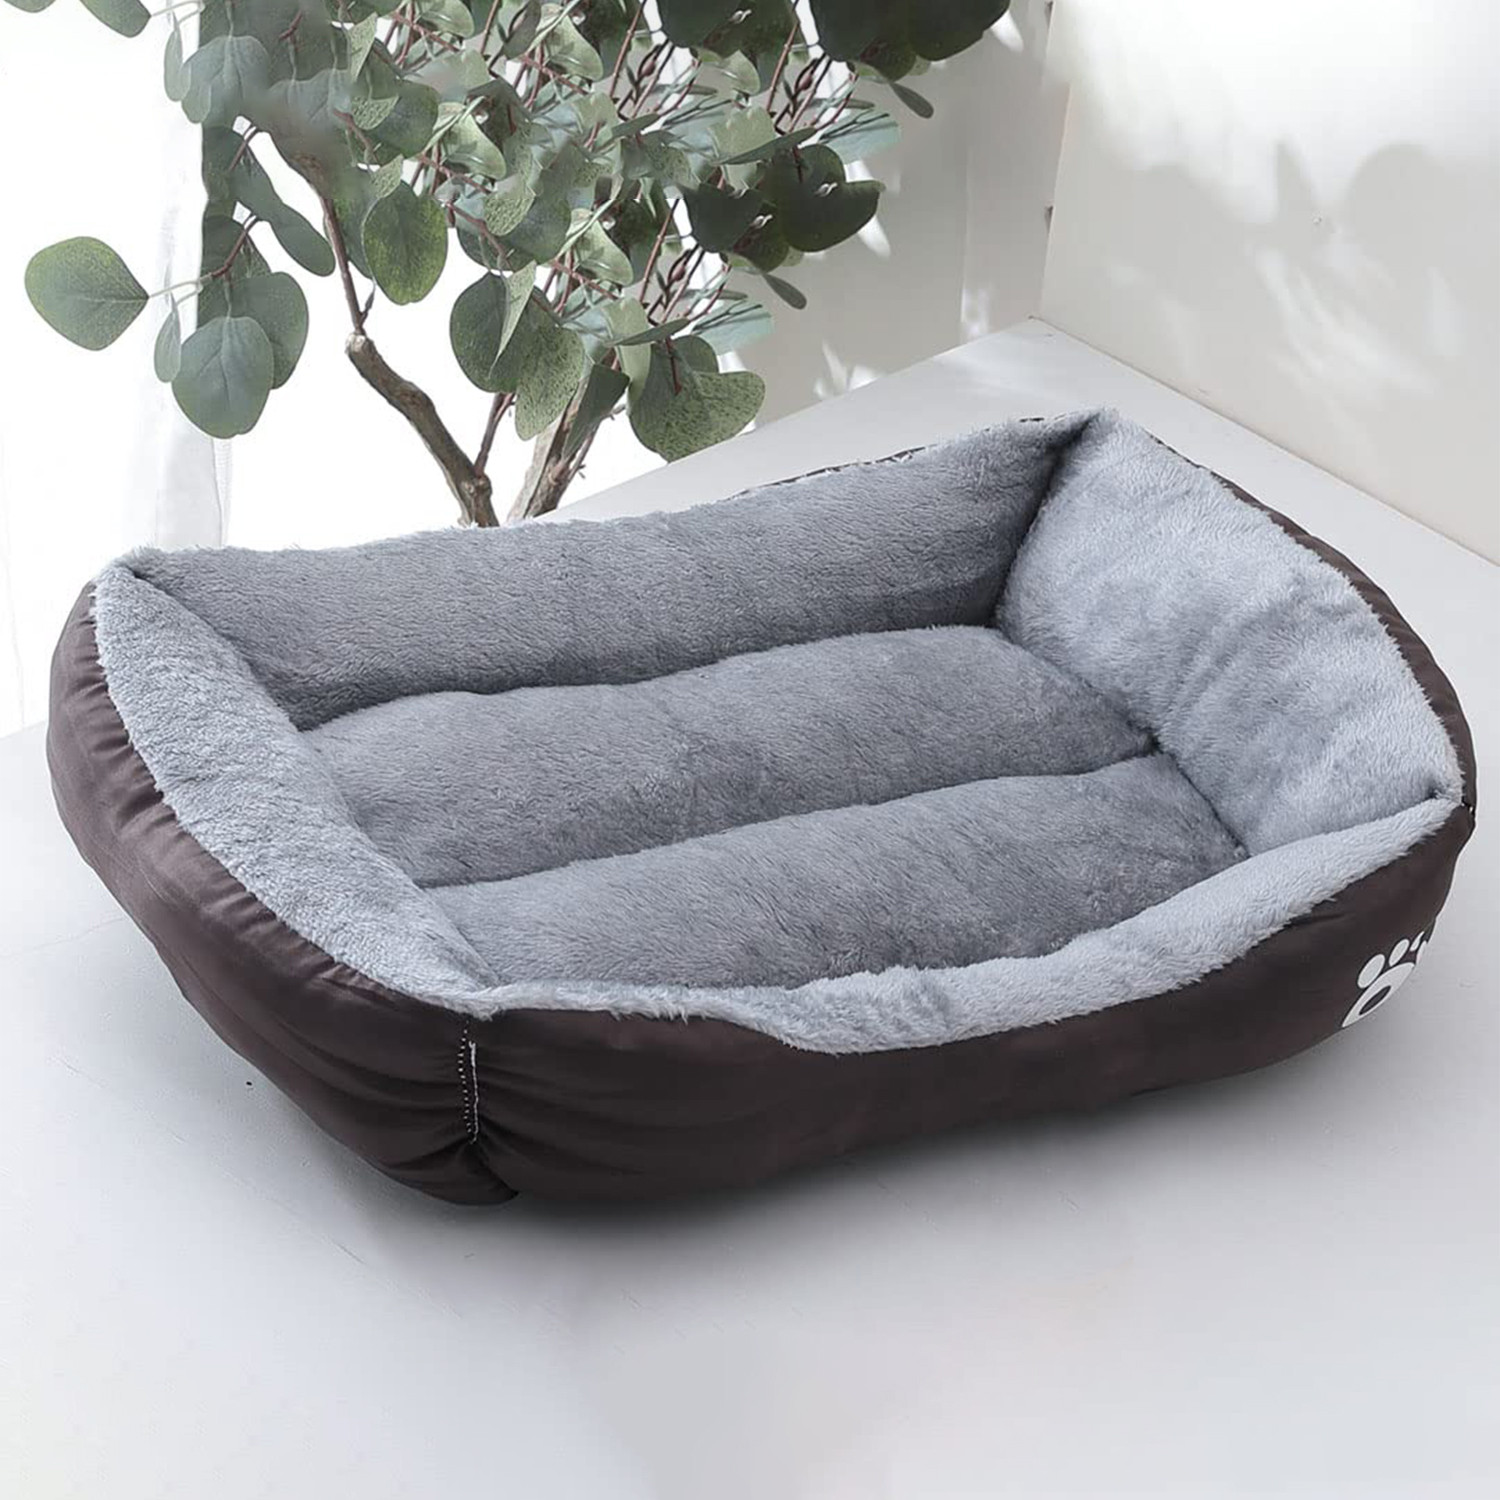 Kuber Industries Dog & Cat Bed|Polyester Face with Cotton & Polyester Filling|Comfortable and Durable|Rectangle Pet Bed for Enhanced Stretching Space|Machine Wash|QY036BR-L|Brown